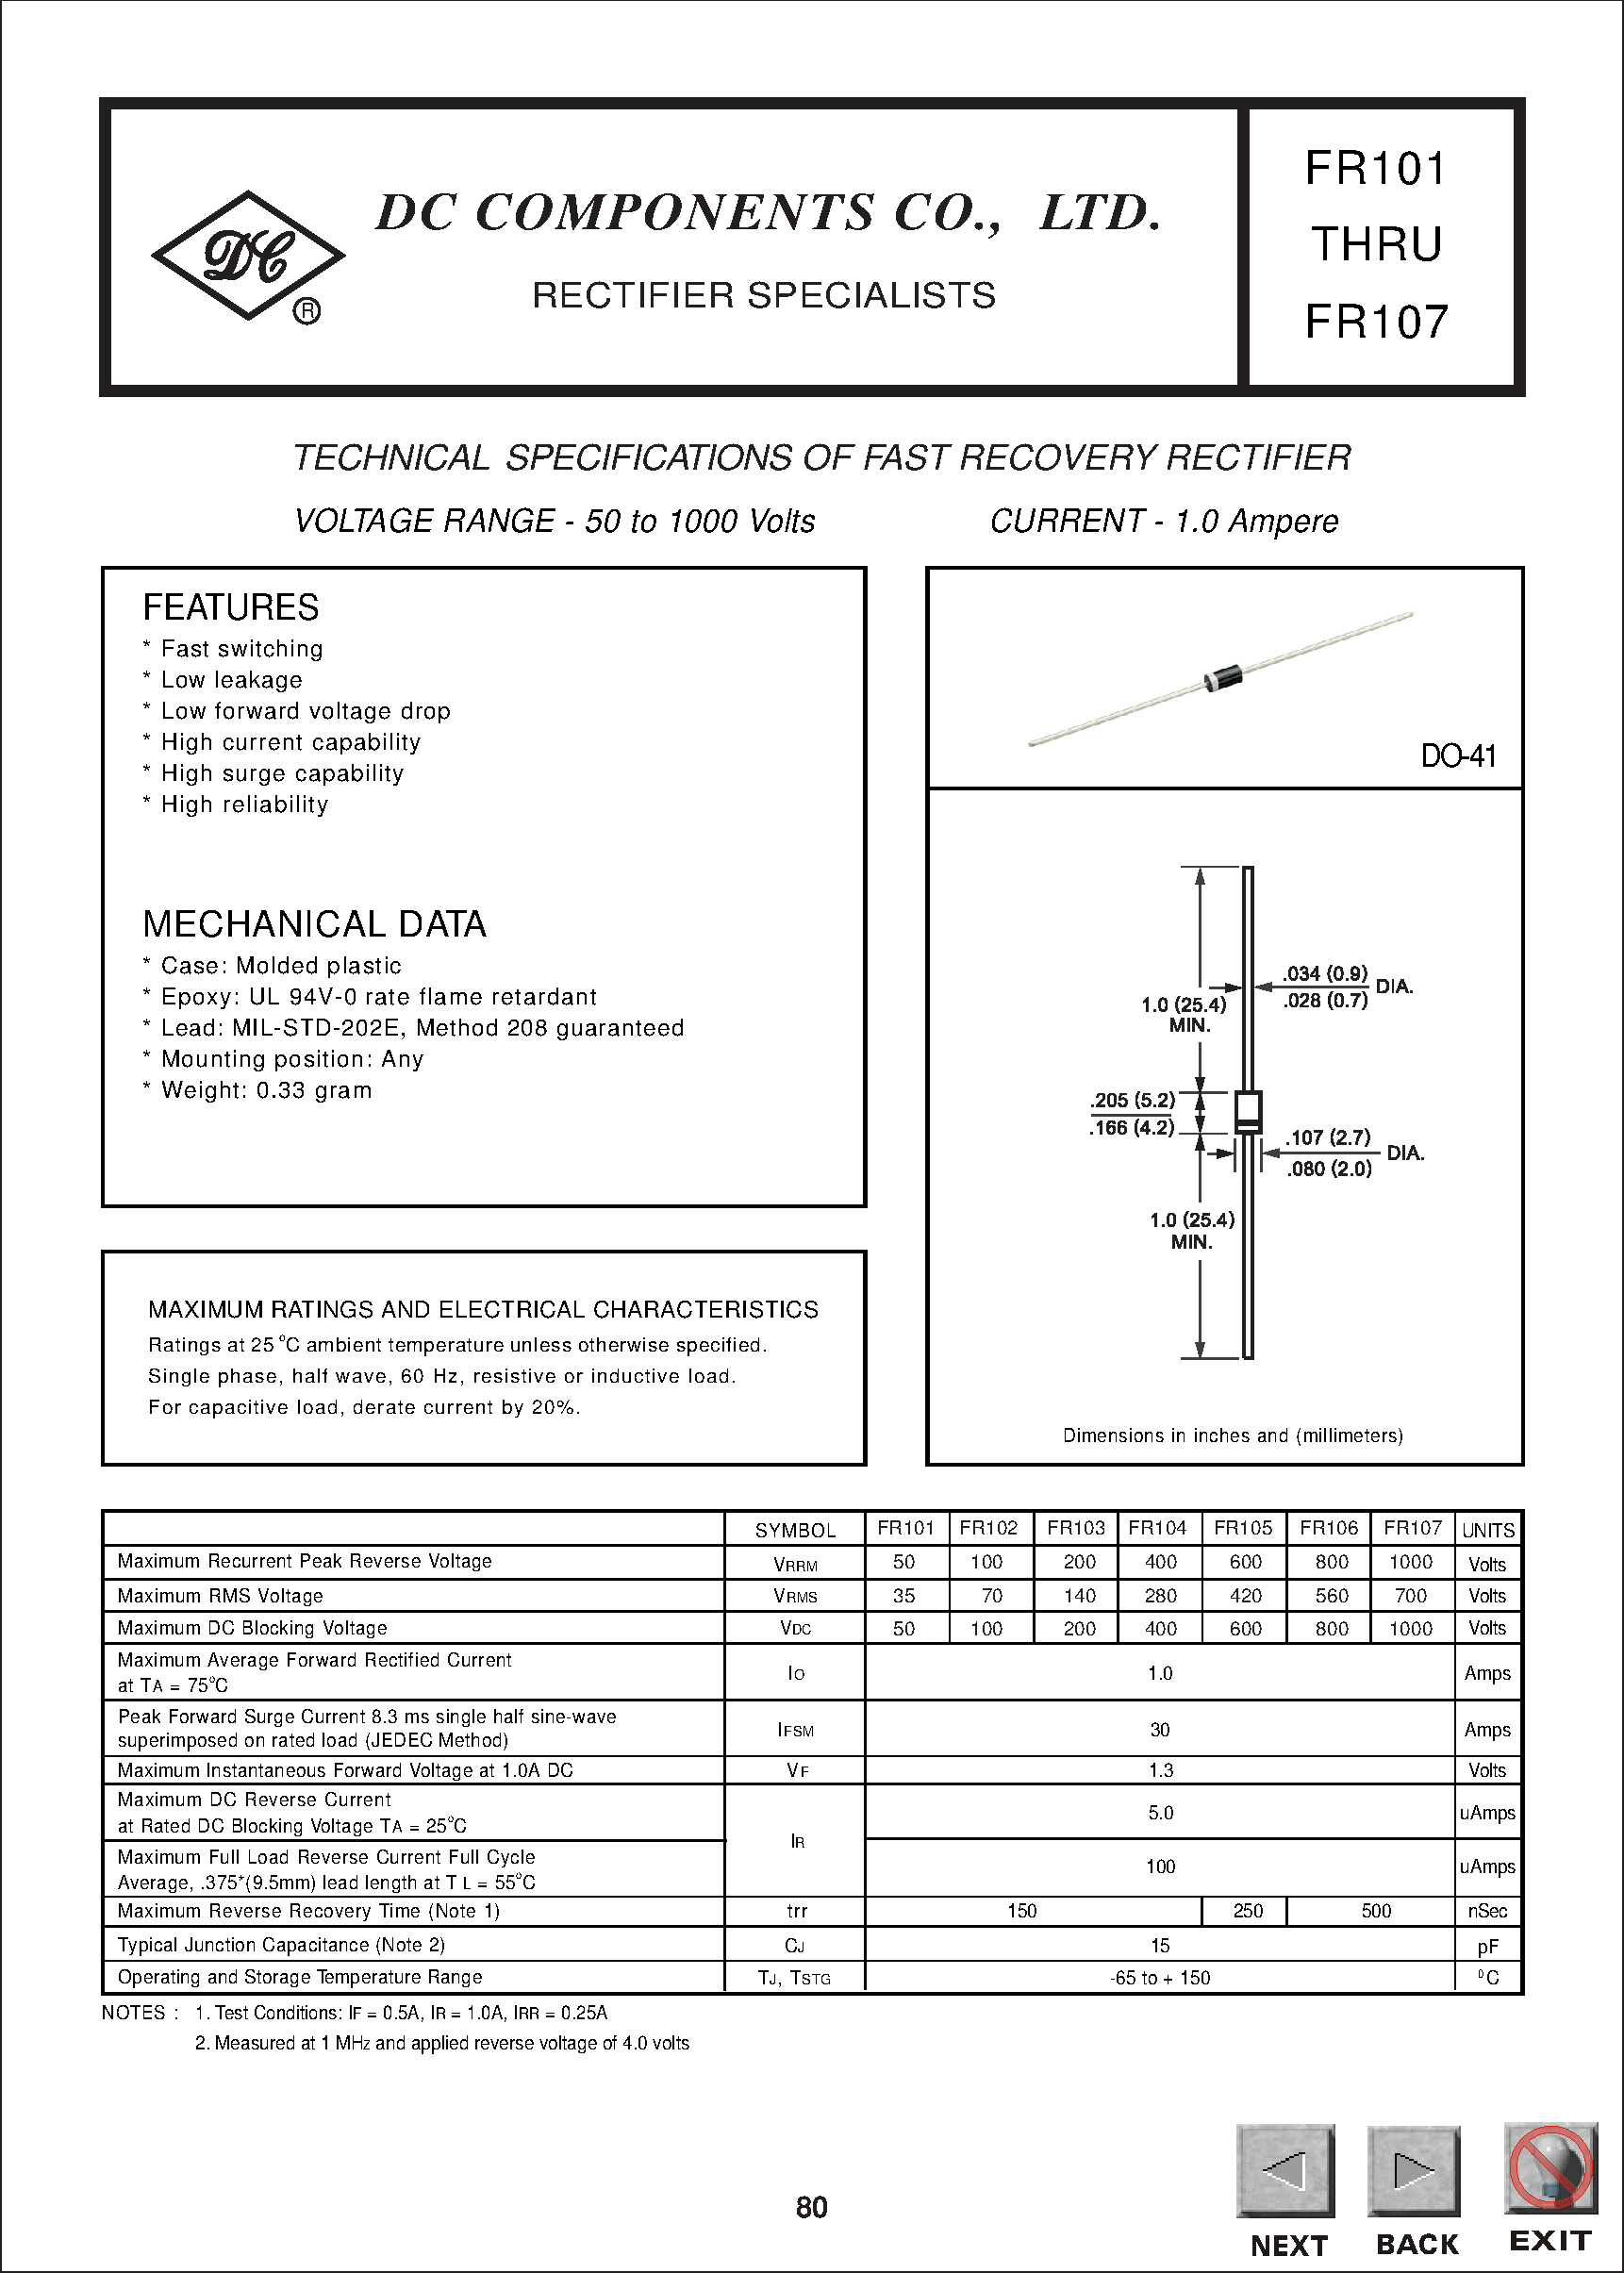 Datasheet FR101 - TECHNICAL SPECIFICATIONS OF FAST RECOVERY RECTIFIER page 1